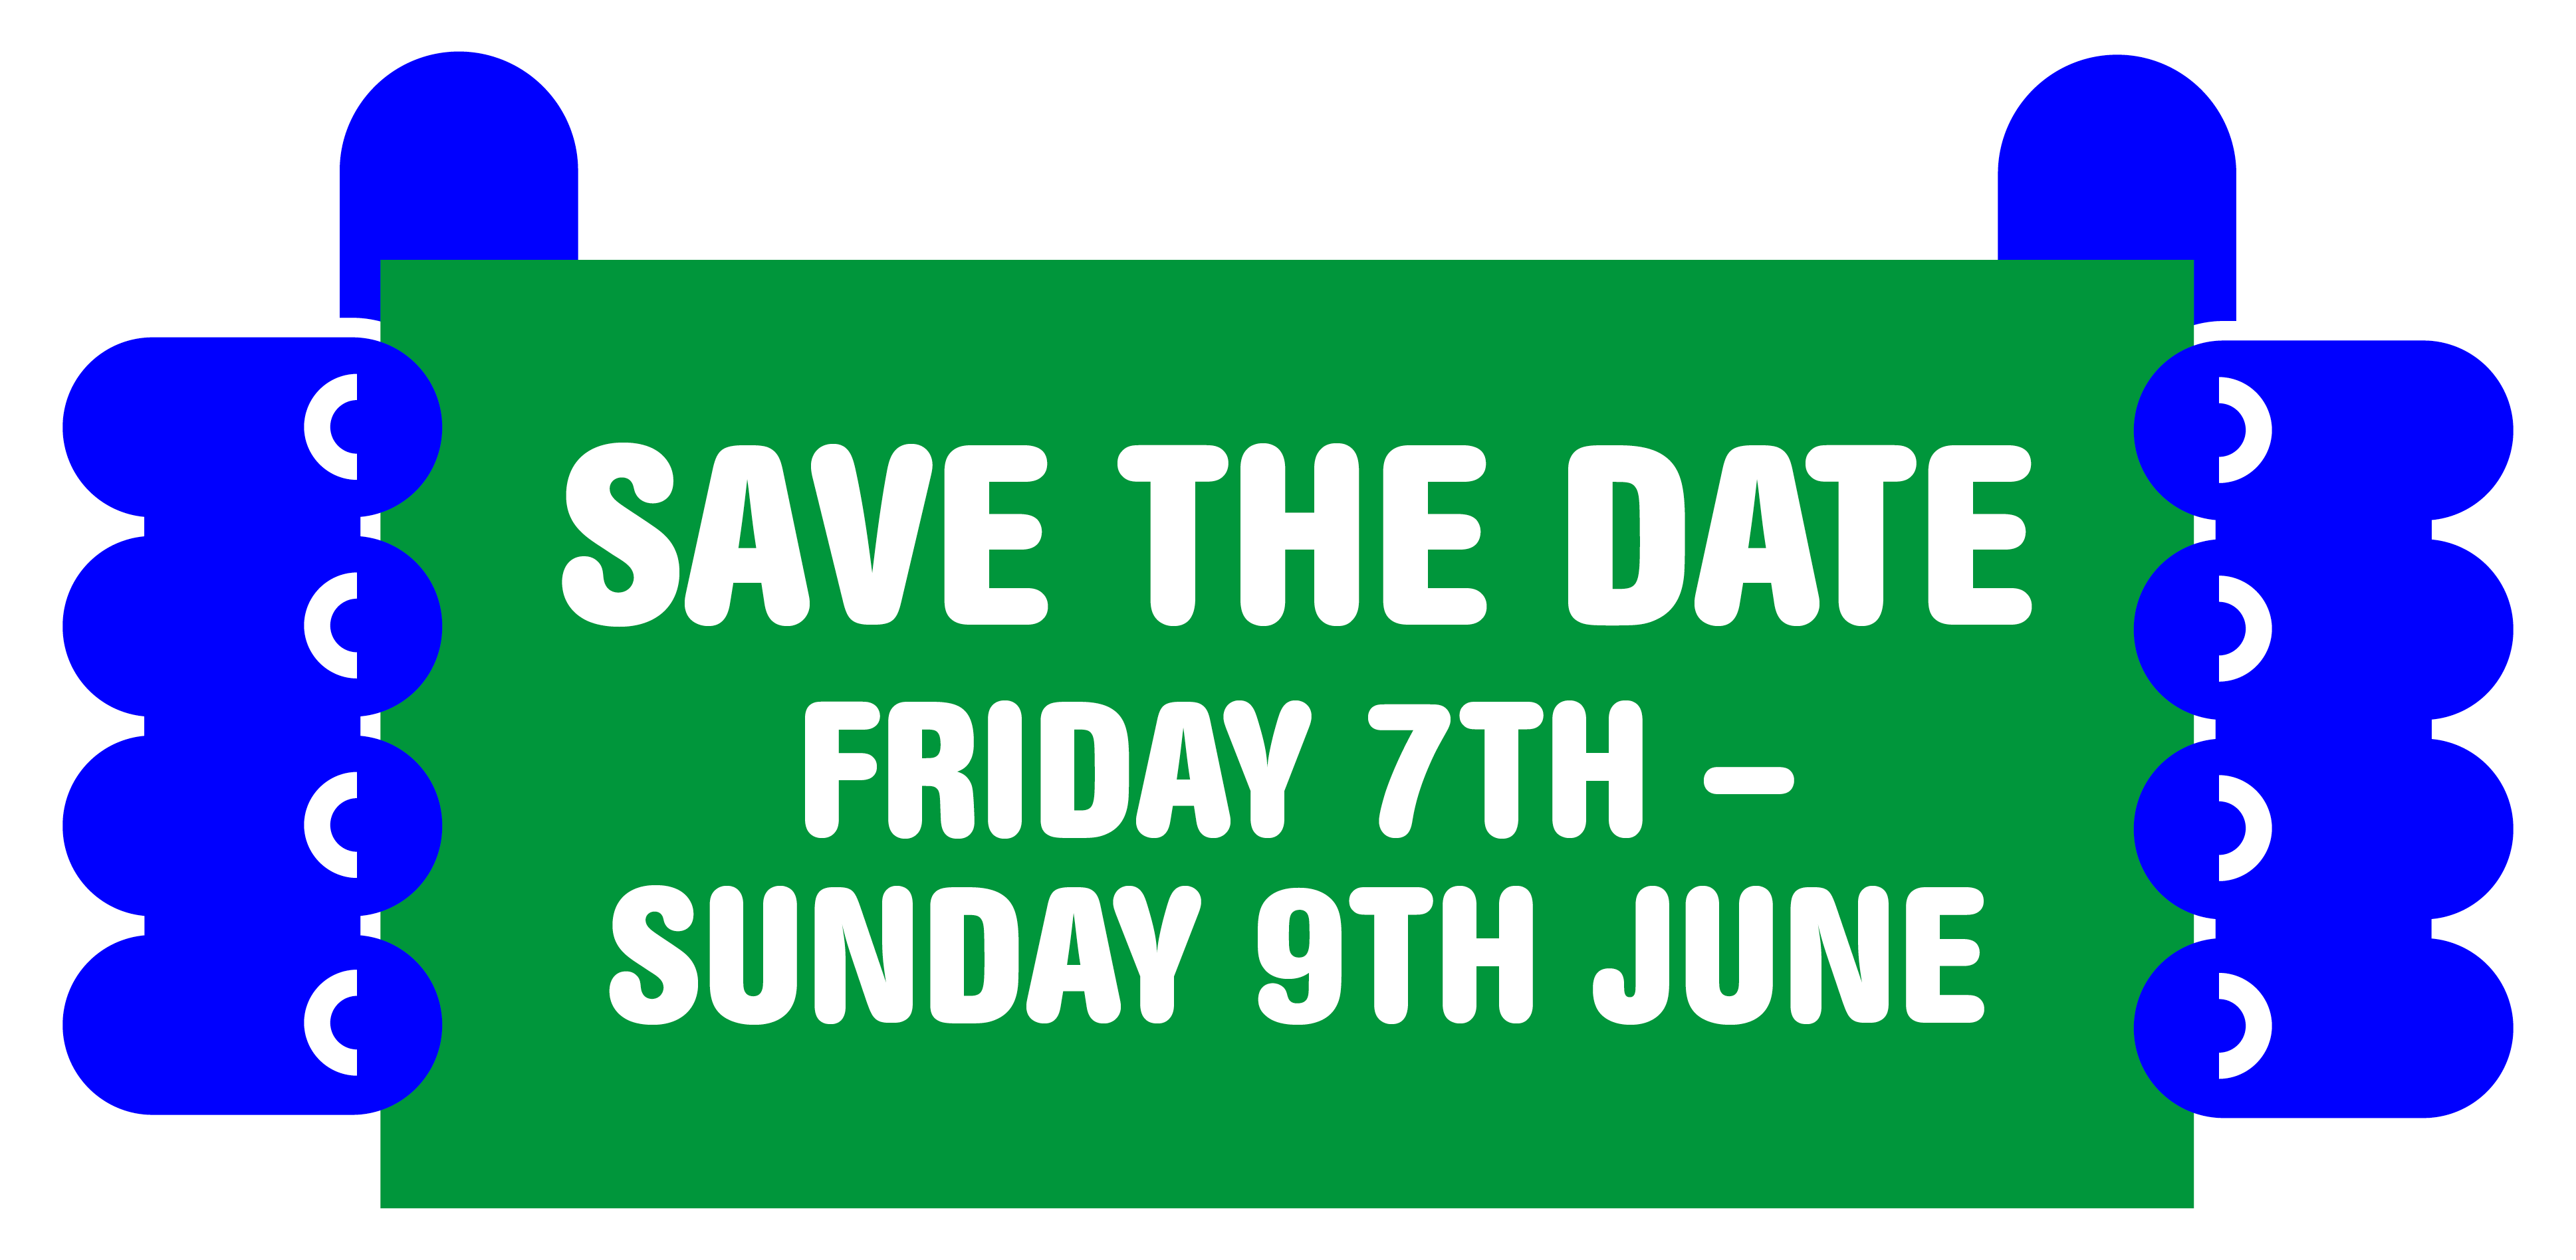 save the date friday 7th - Sunday 9th June